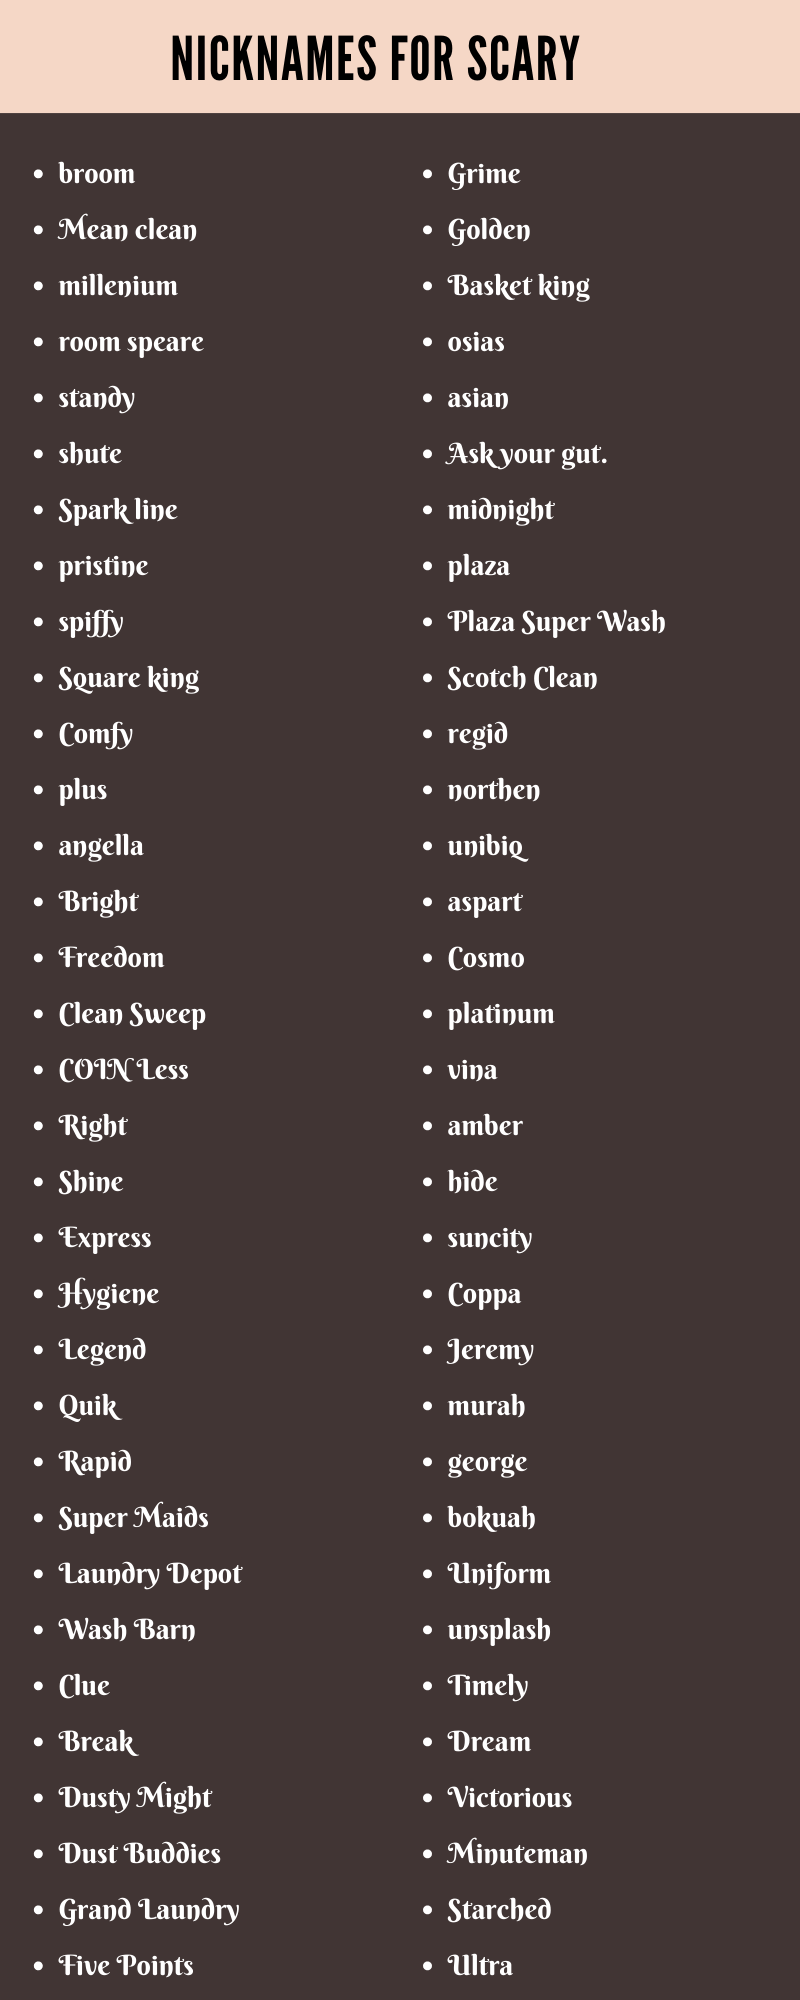 Nicknames for Scary